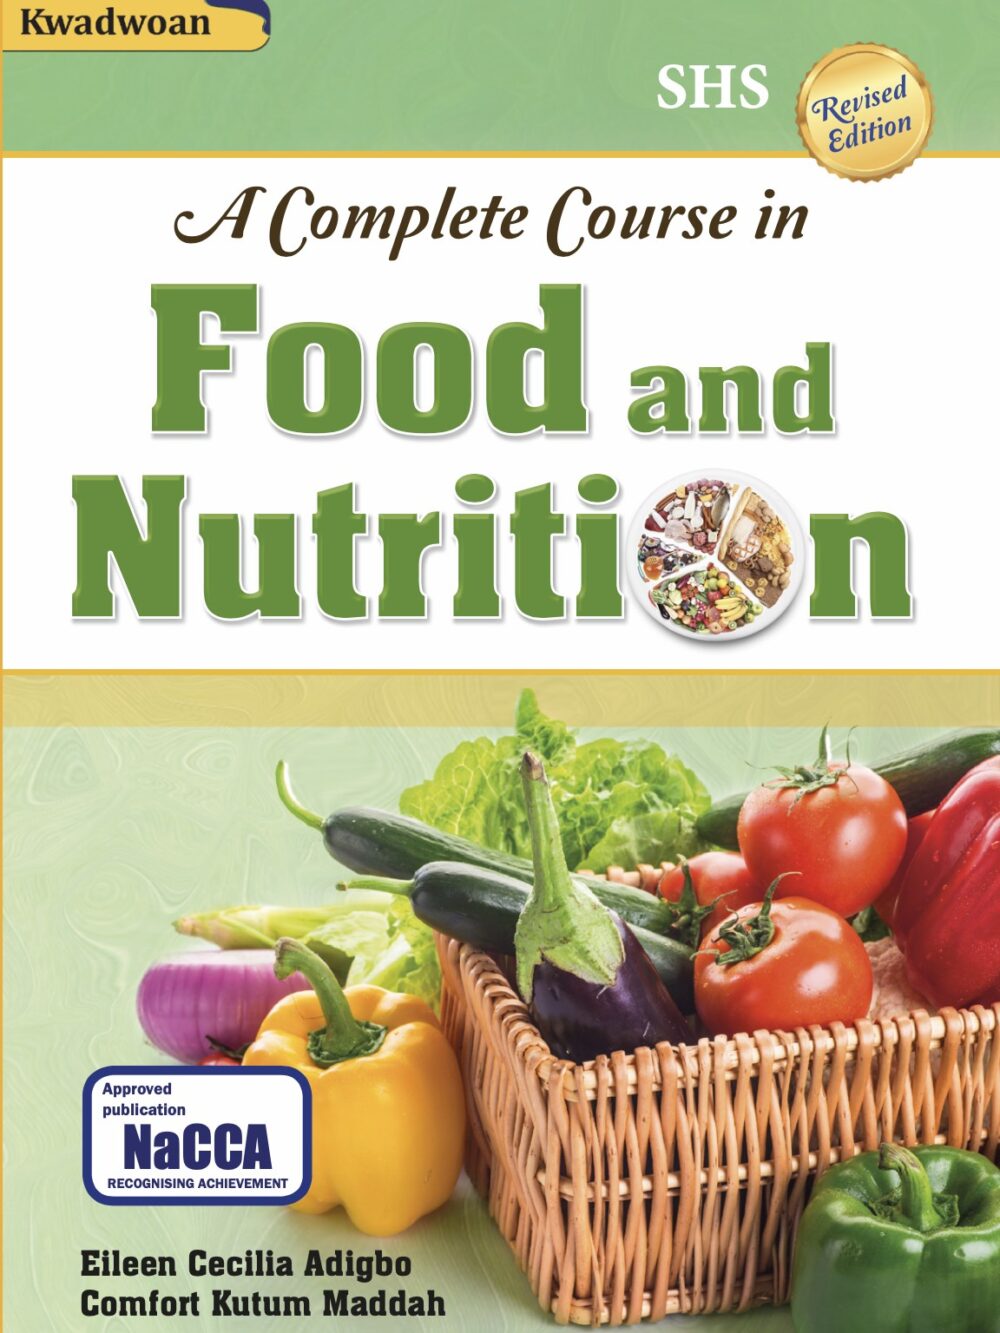 A Complete course in Food and Nutrition provides students with a book which treats every topic under this subject exhaustively.  It will serve the need of Food and Nutrition students and indeed all lovers and curious adherents of the food industry.